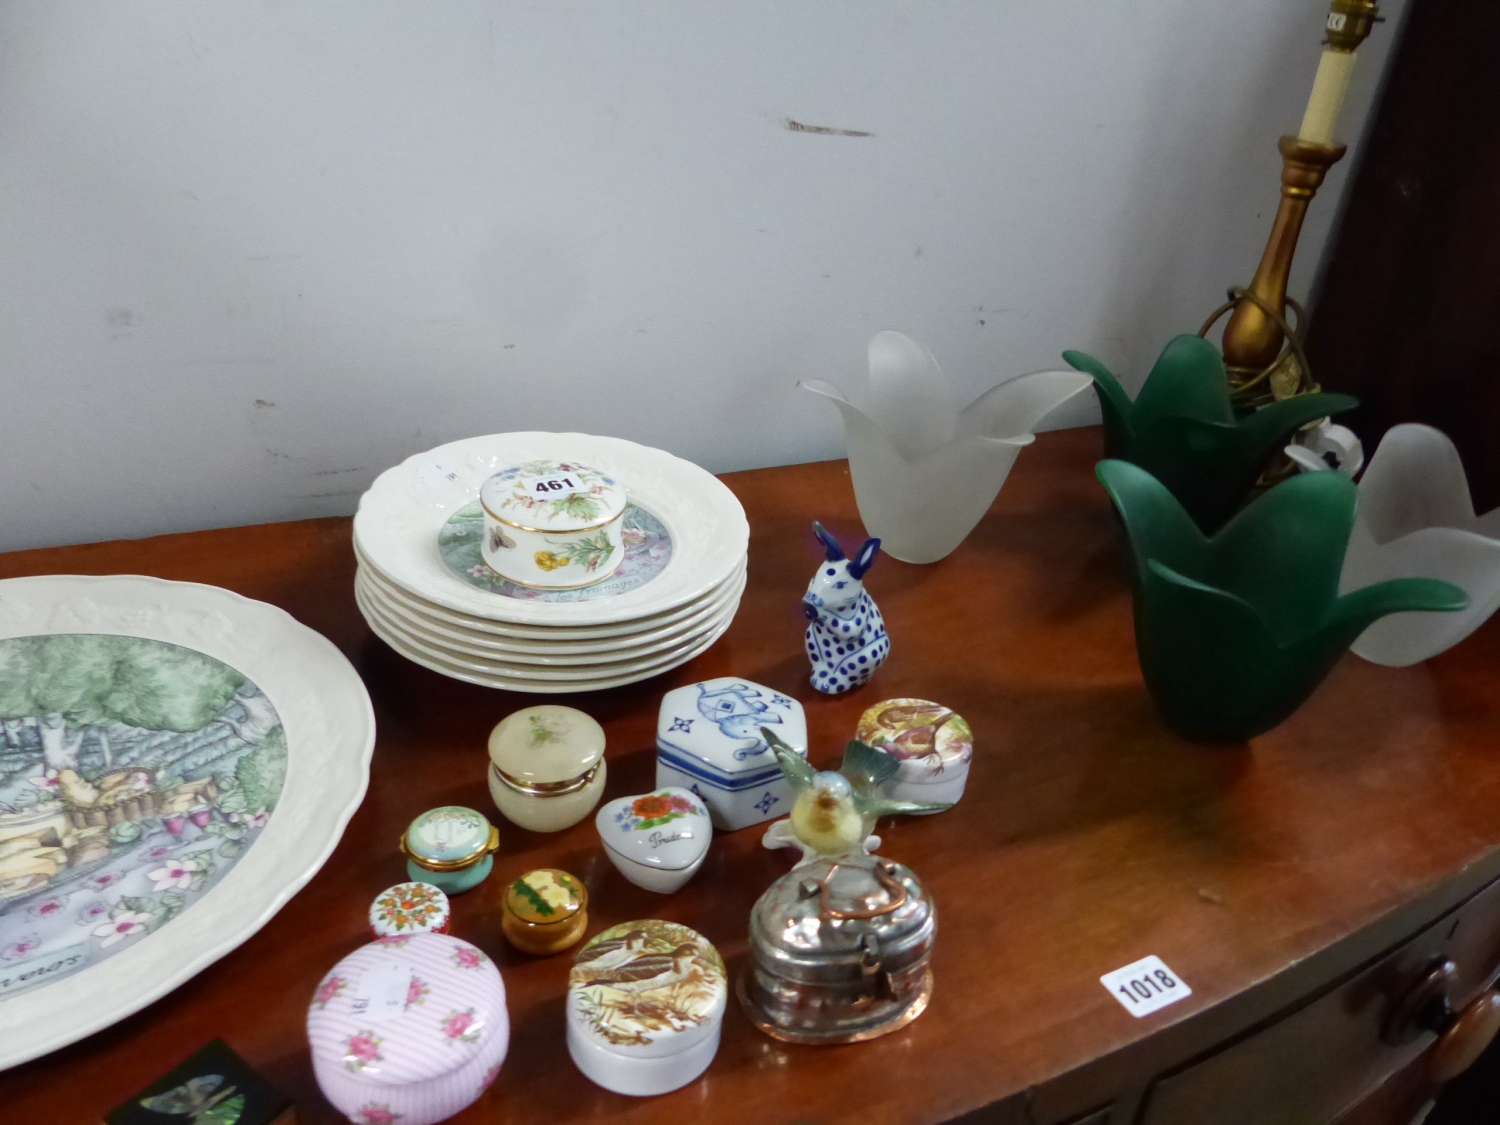 VARIOUS TRINKET BOXES, A SET OF GIEN FRENCH SIDE PLATES AND A SERVING PLATE ETC.